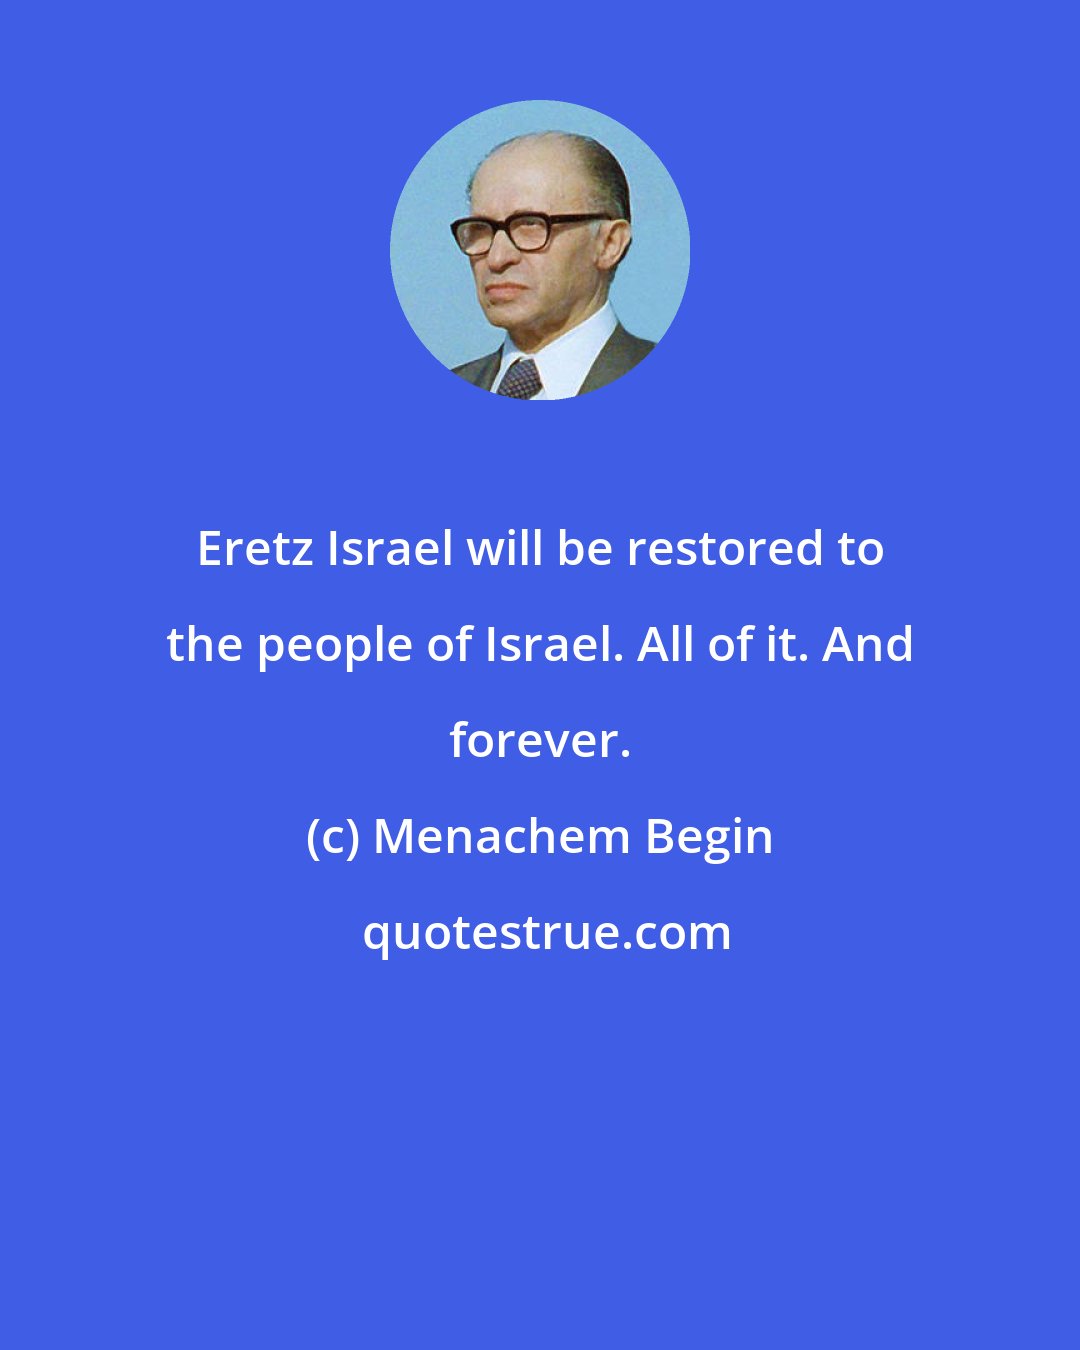 Menachem Begin: Eretz Israel will be restored to the people of Israel. All of it. And forever.